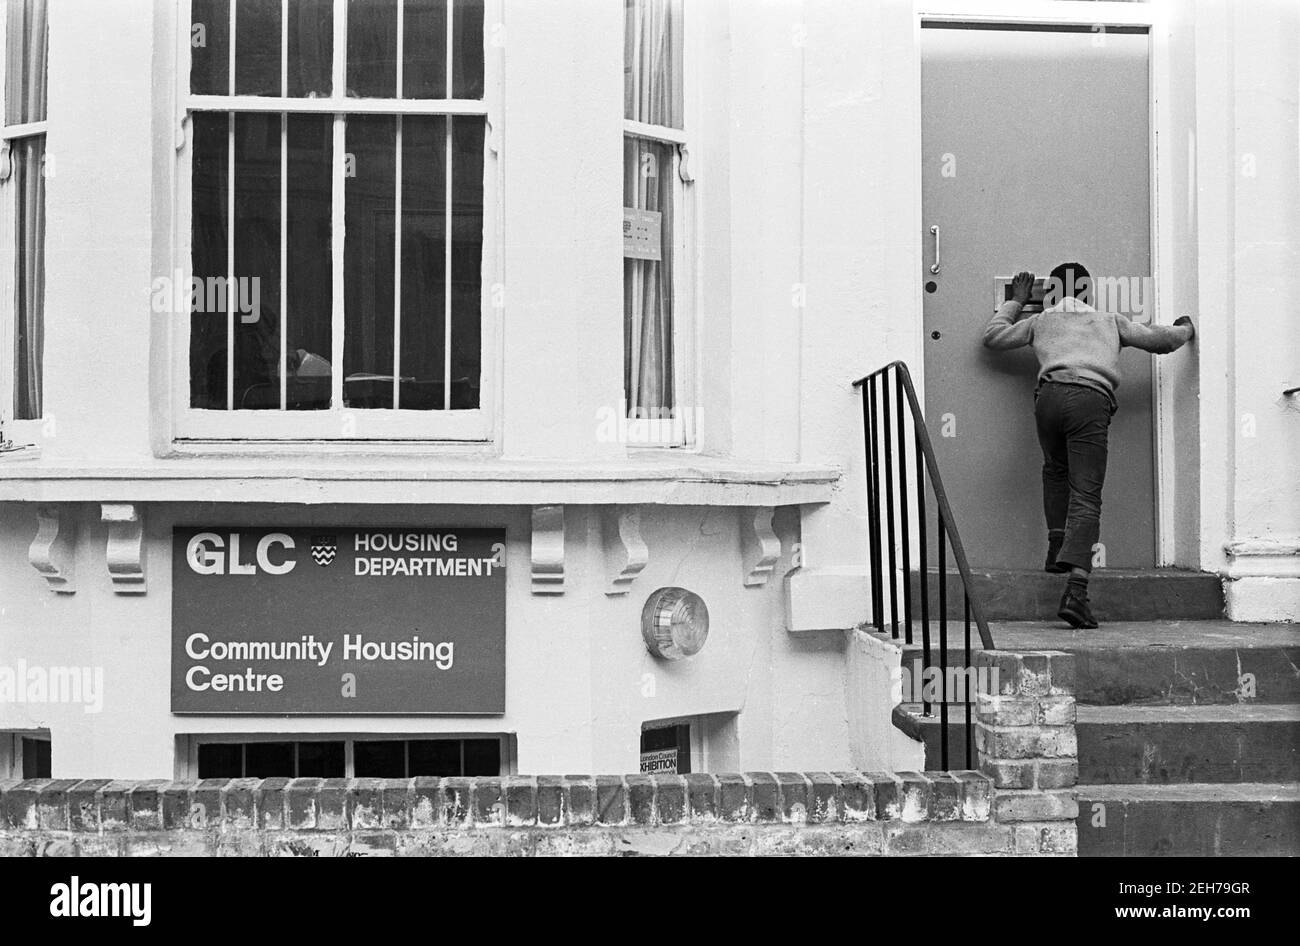 UK, West London, Notting Hill, 1973. Rundown & dilapidated large four-story houses are starting to be restored and redecorated. Greater London Council Housing Department - Community Housing Centre for local people. Stock Photo